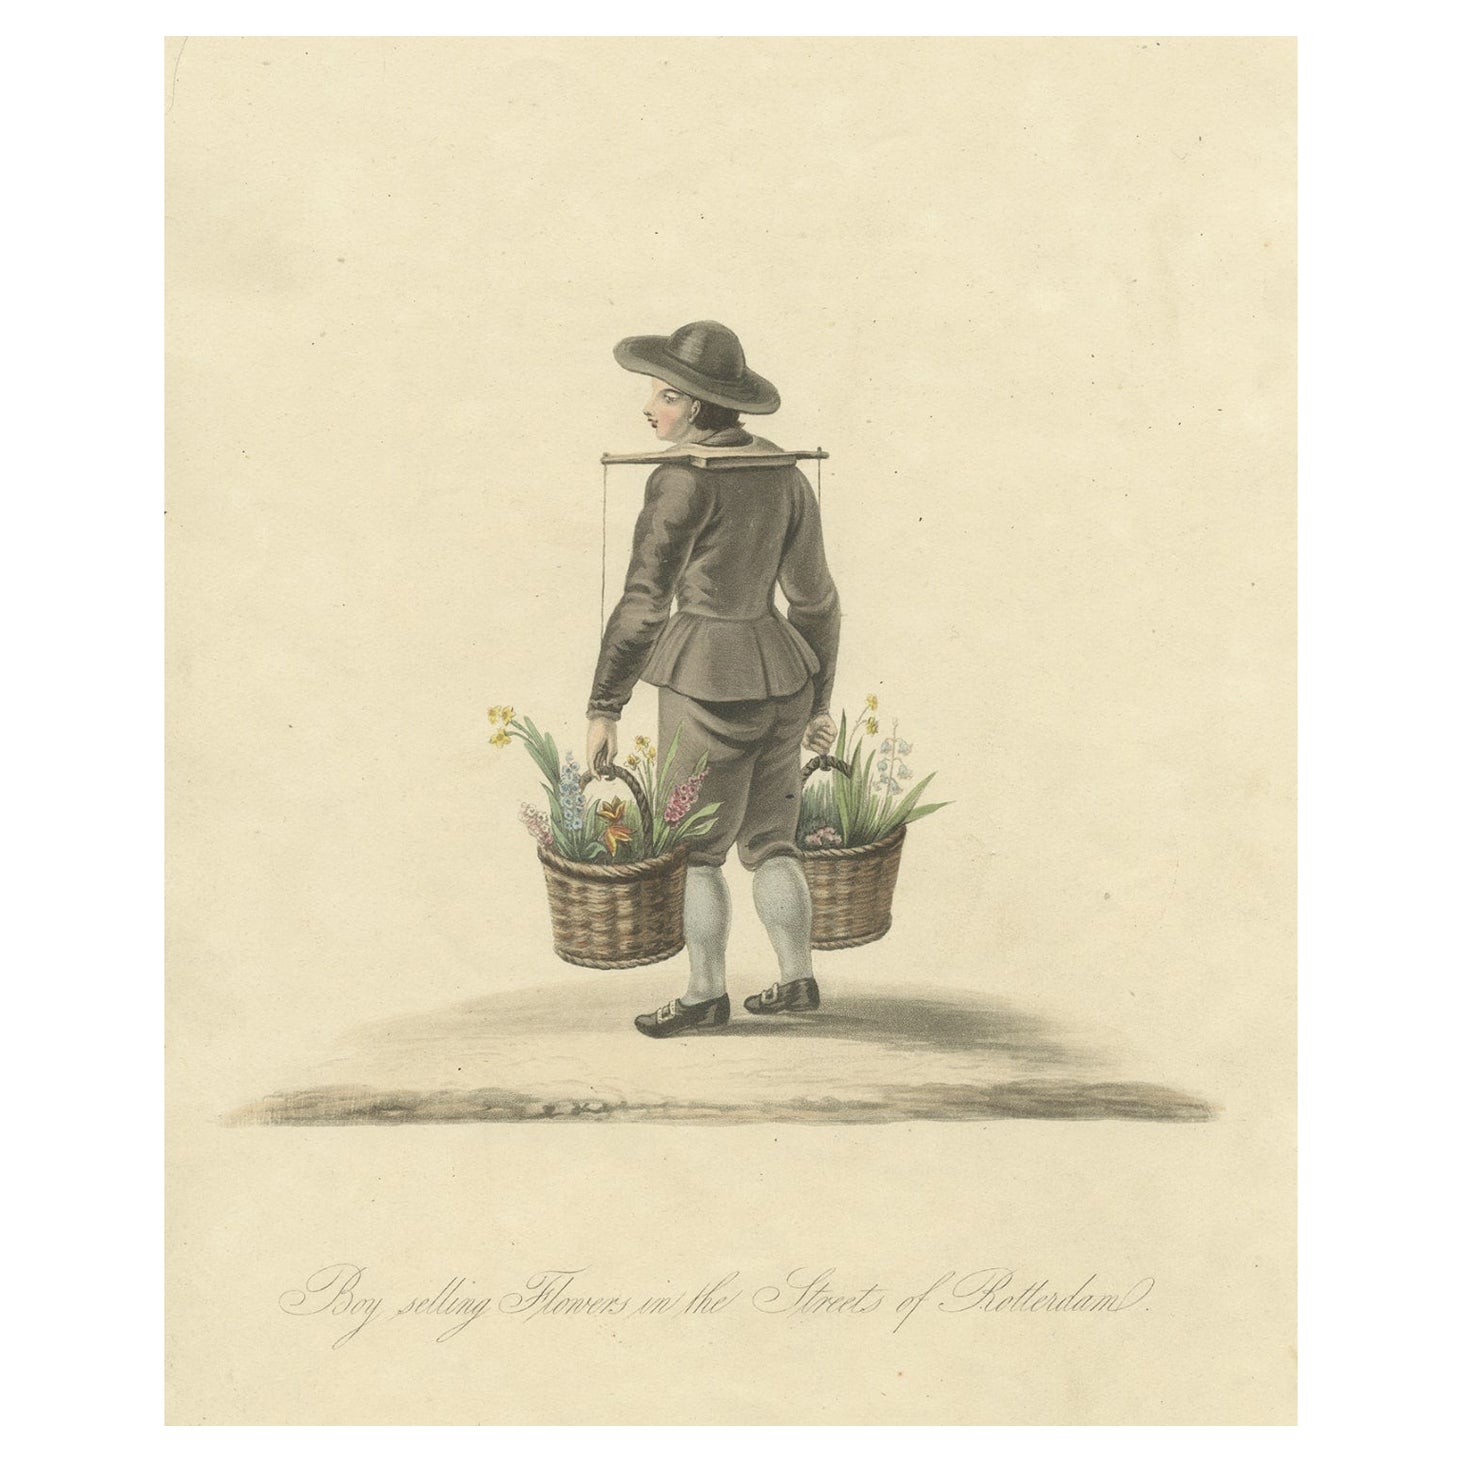 Antique Handcolored Print of a Boy Selling Flowers in Rotterdam, Holland, 1817